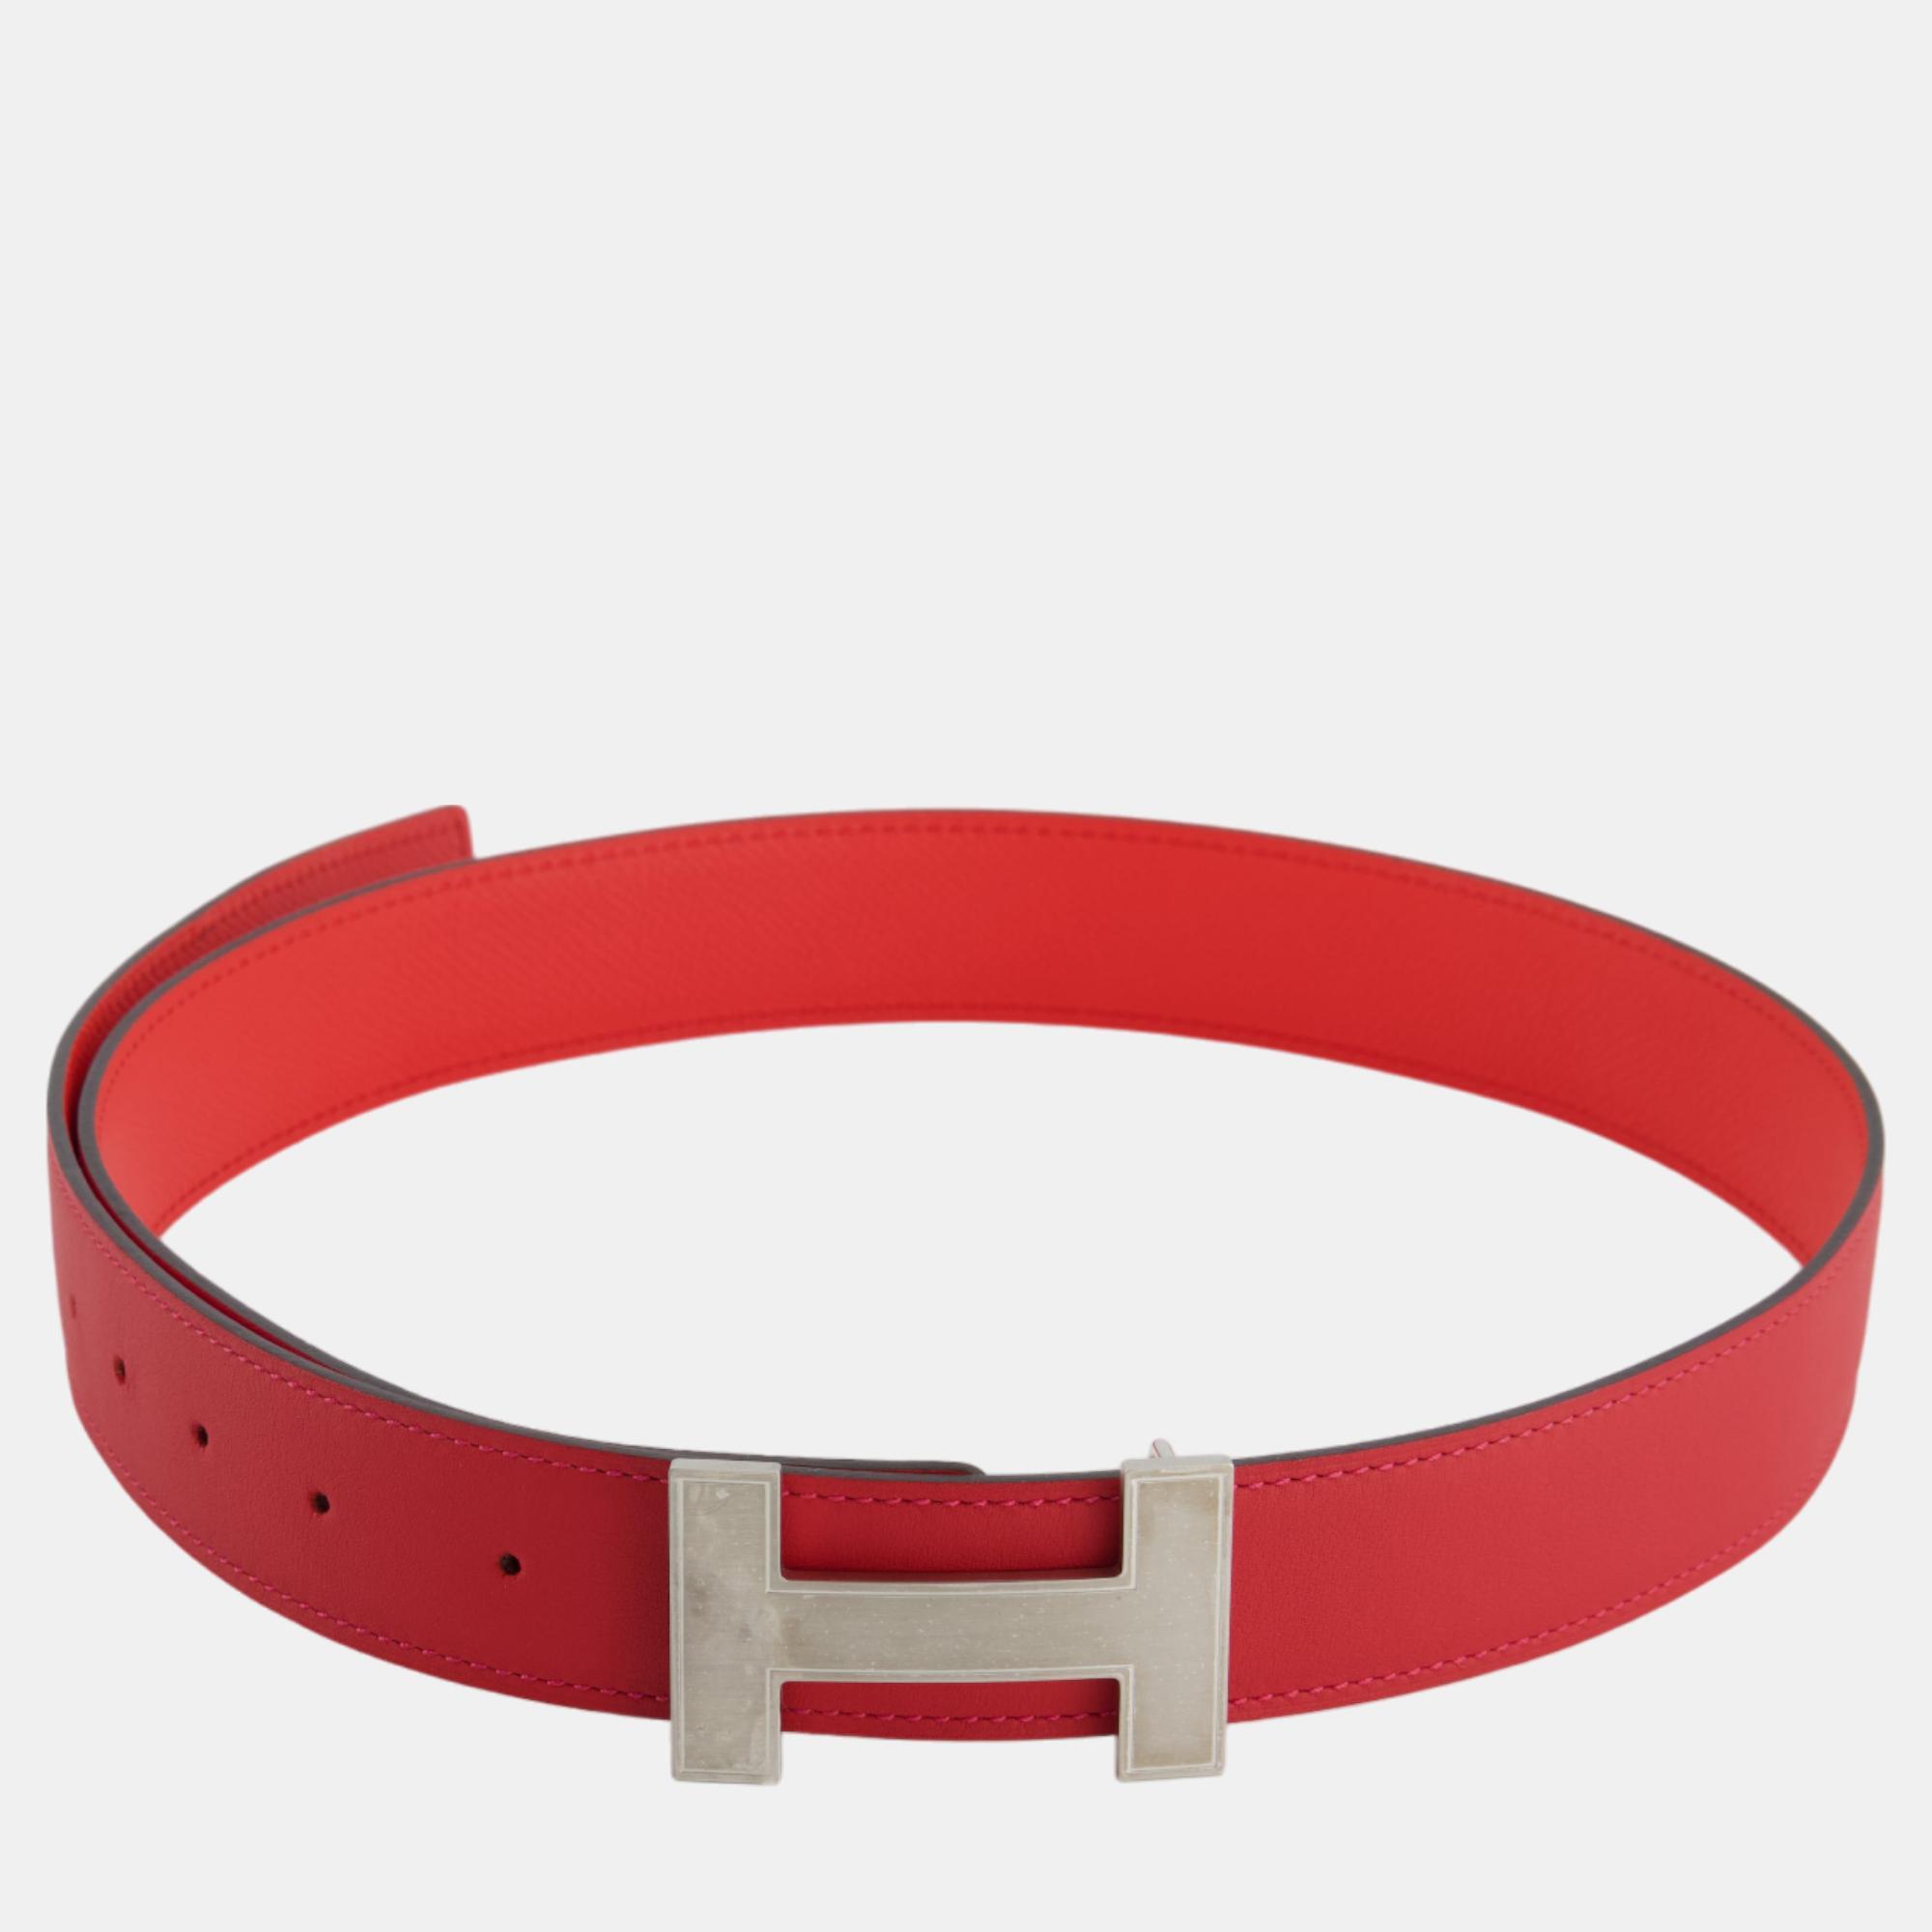 Hermes Red Reversible Constance Belt With Brushed Palladium Buckle Size 85cm